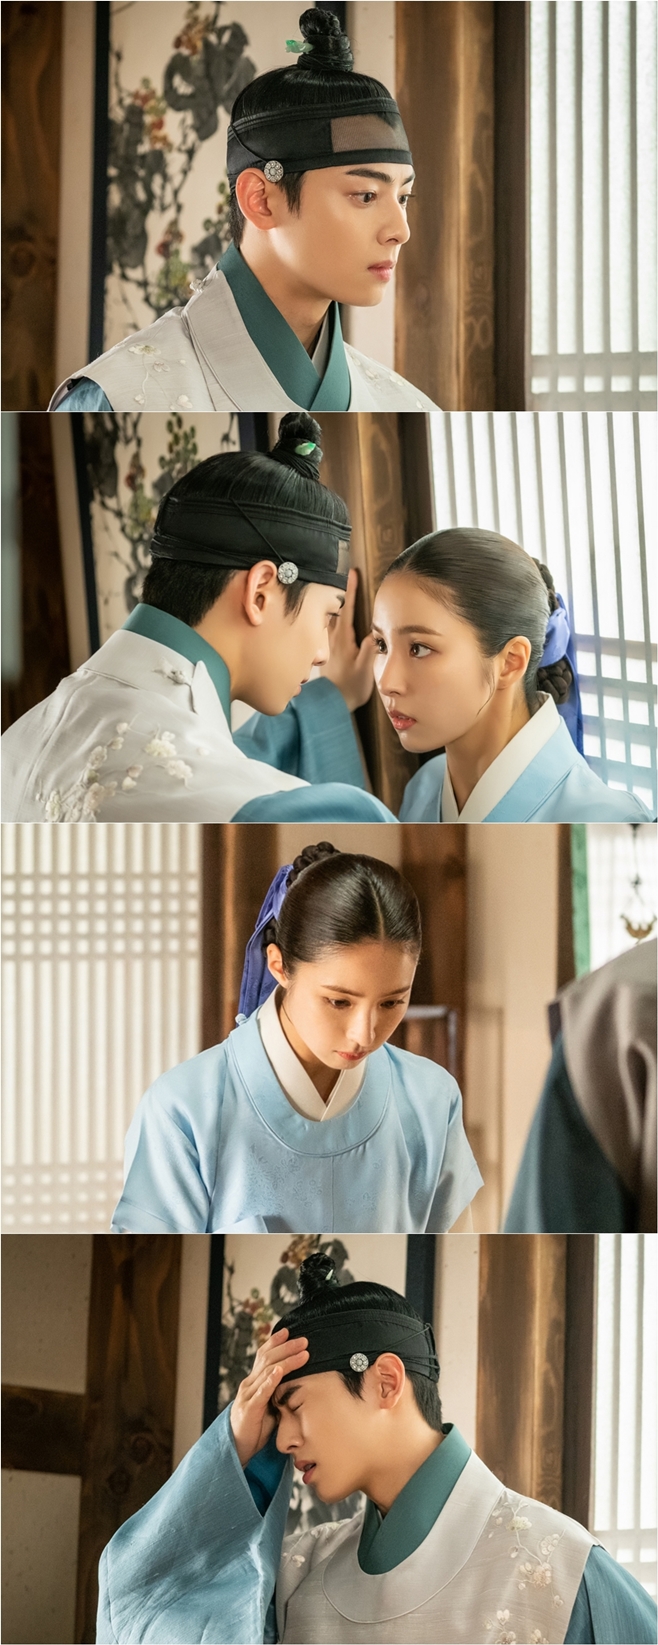 Na Hae-ryung, the new officer Jung Eun-woo tries to get a strong wall over Shin Se-kyung.The MBC drama Na Hae-ryung (played by Kim Ho-soo and directed by Kang Il-soo) released the close scenes of Na Hae-ryung and Lee Rim (Cha Jung Eun-woo) on the 13th.Na Hae-ryung, starring Shin Se-kyung Cha Jung Eun-woo Park Ki-woong, is the first problematic first lady () of Joseon and the romance annals of Prince Lee Rim, the anti-war mother solo.Lee Ji-hoon, Park Ji-hyun and other young actors, Kim Ji-jin, Kim Min-sang, Choi Duk-moon,In the 16th Na Hae-ryung, a new employee, Lee Lim, who was a member of the Pyeongan province, was shown to implement the right-hand method for the people.Na Hae-ryung, who accompanied the procession, encouraged Lee to use the law of the king, and focused his attention on the side of Lee Lim, doing his duty as a servant and servant of the Joseon Dynasty.Na Hae-ryung and Irim, who came back to the palace and met again at the Nokseodang, are revealed and attract attention.Especially, Irim is pushing Na Hae-ryung to the end of the wall with serious eyes that I have never seen before, which makes the viewers excited.Na Hae-ryung is embarrassed by the actions of the irim and the close eye contact, and he is out of his arms and bows his head politely, adding to the curiosity of what happened to the rest of them.Finally, the appearance of Irim, who closed his eyes and touched his head as if regretting his actions, makes him guess that things did not flow according to his will.Na Hae-ryung, a new employee, said, Irim will come to Na Hae-ryung by taking advantage of his experience as a romance novelist while Na Hae-ryung and Irim are getting closer after the Pyeongando ceremony. I would like to ask you to check this broadcast with a lot of interest. I hope so, he said.It aired at 8:55 p.m. on the 14th.